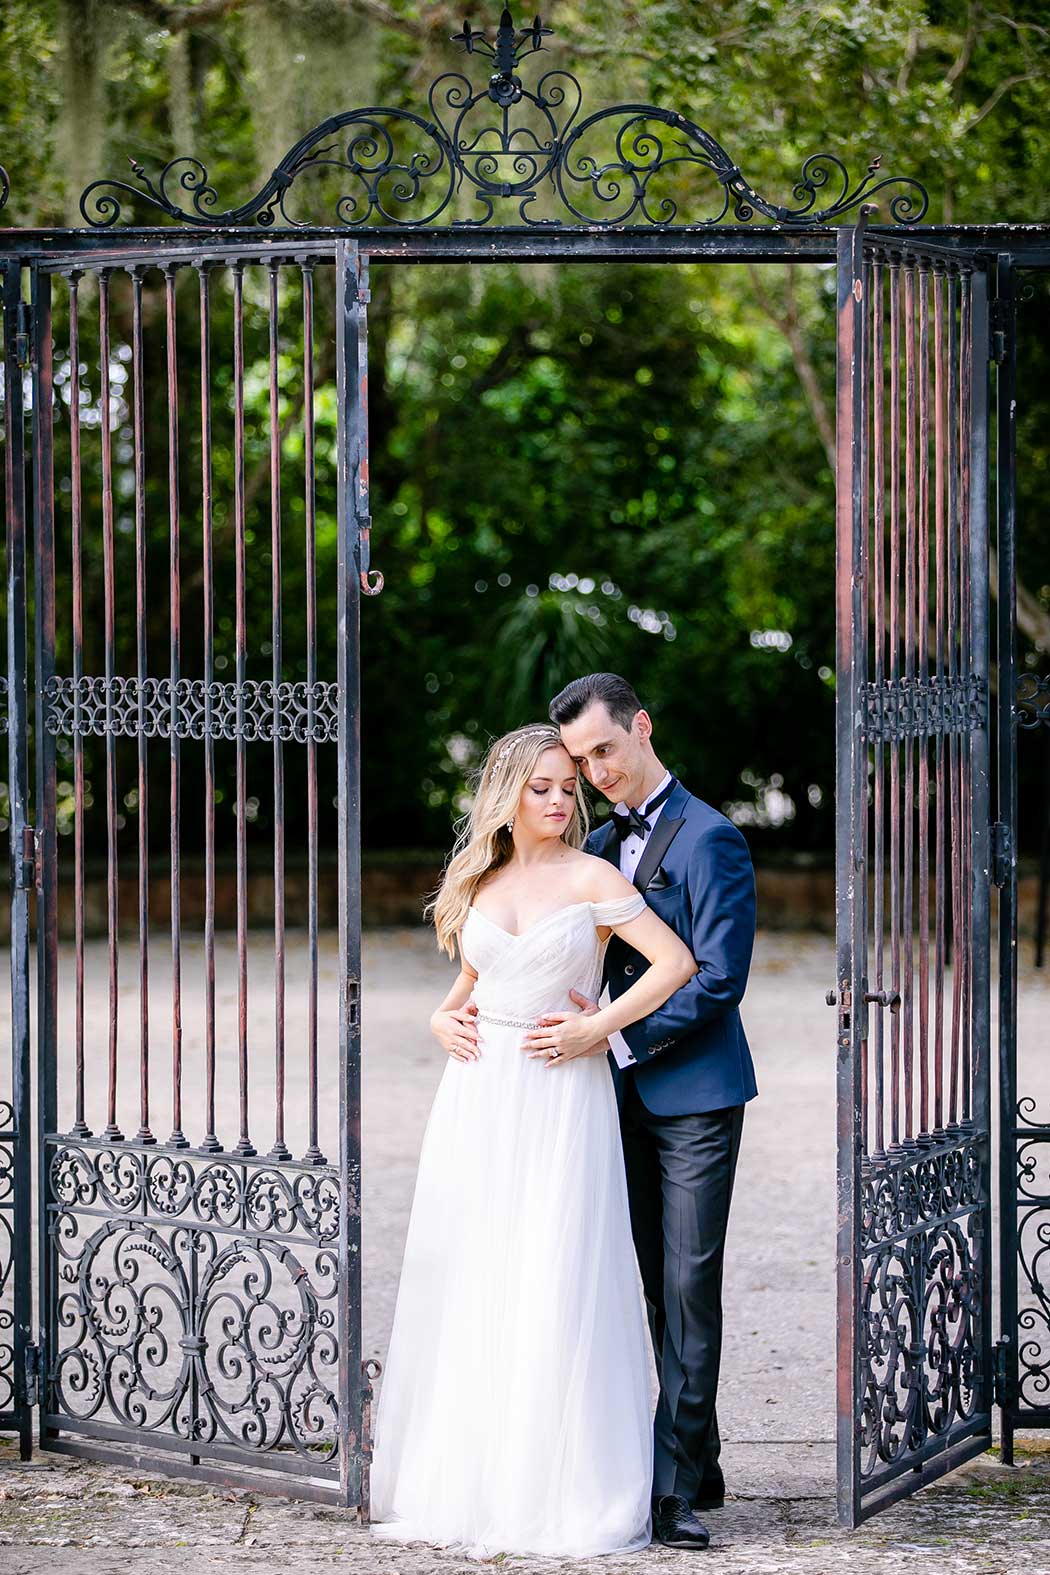 vizcaya museum and gardens engagement photography | engagement photos vizcaya | couples photos vizcaya | vizcaya couples photoshoot